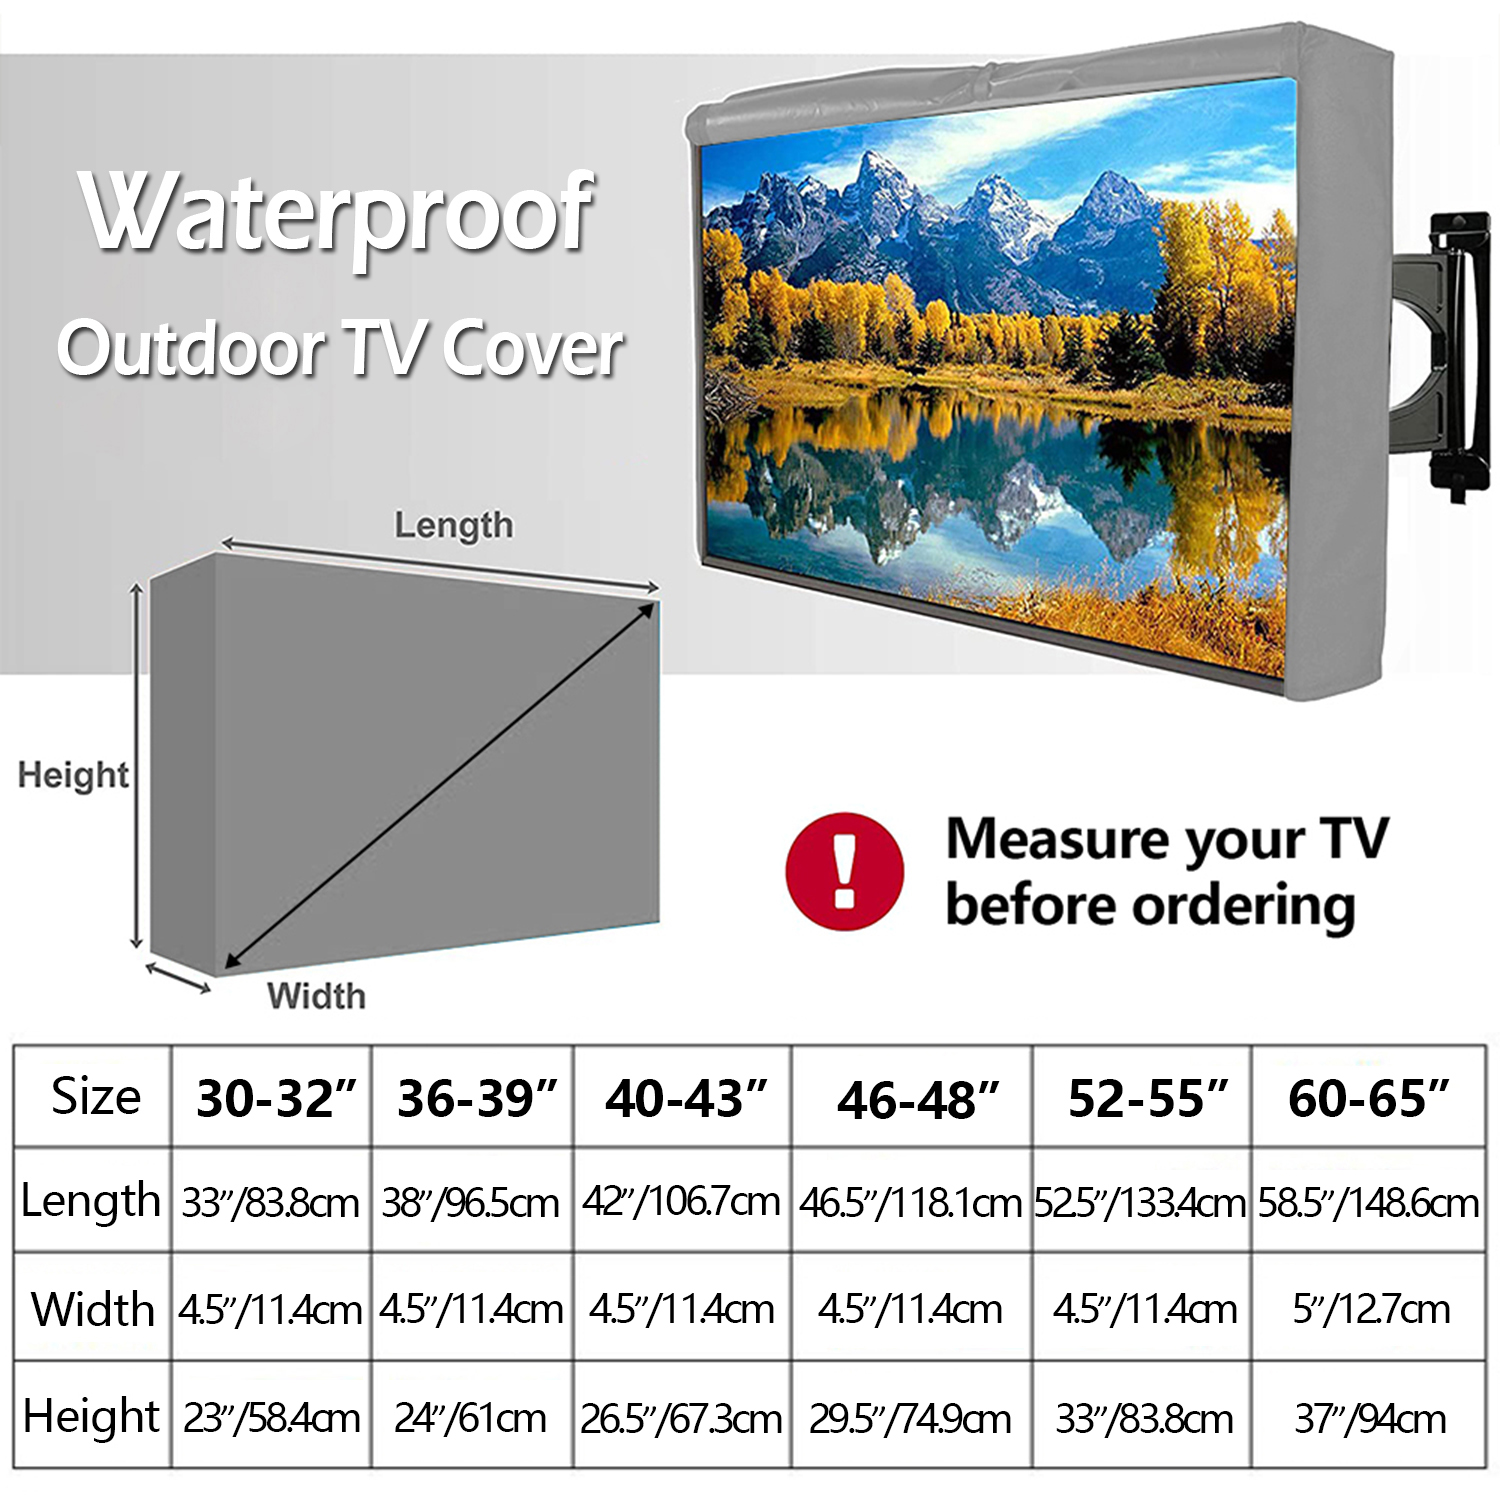 IC ICLOVER 52"-55" Outdoor Weatherproof LCD Plasma TV/Television Cover Flat Screen TV/Television Dustproof Protector with Waterproof Remote Pocket, Gray - image 3 of 9